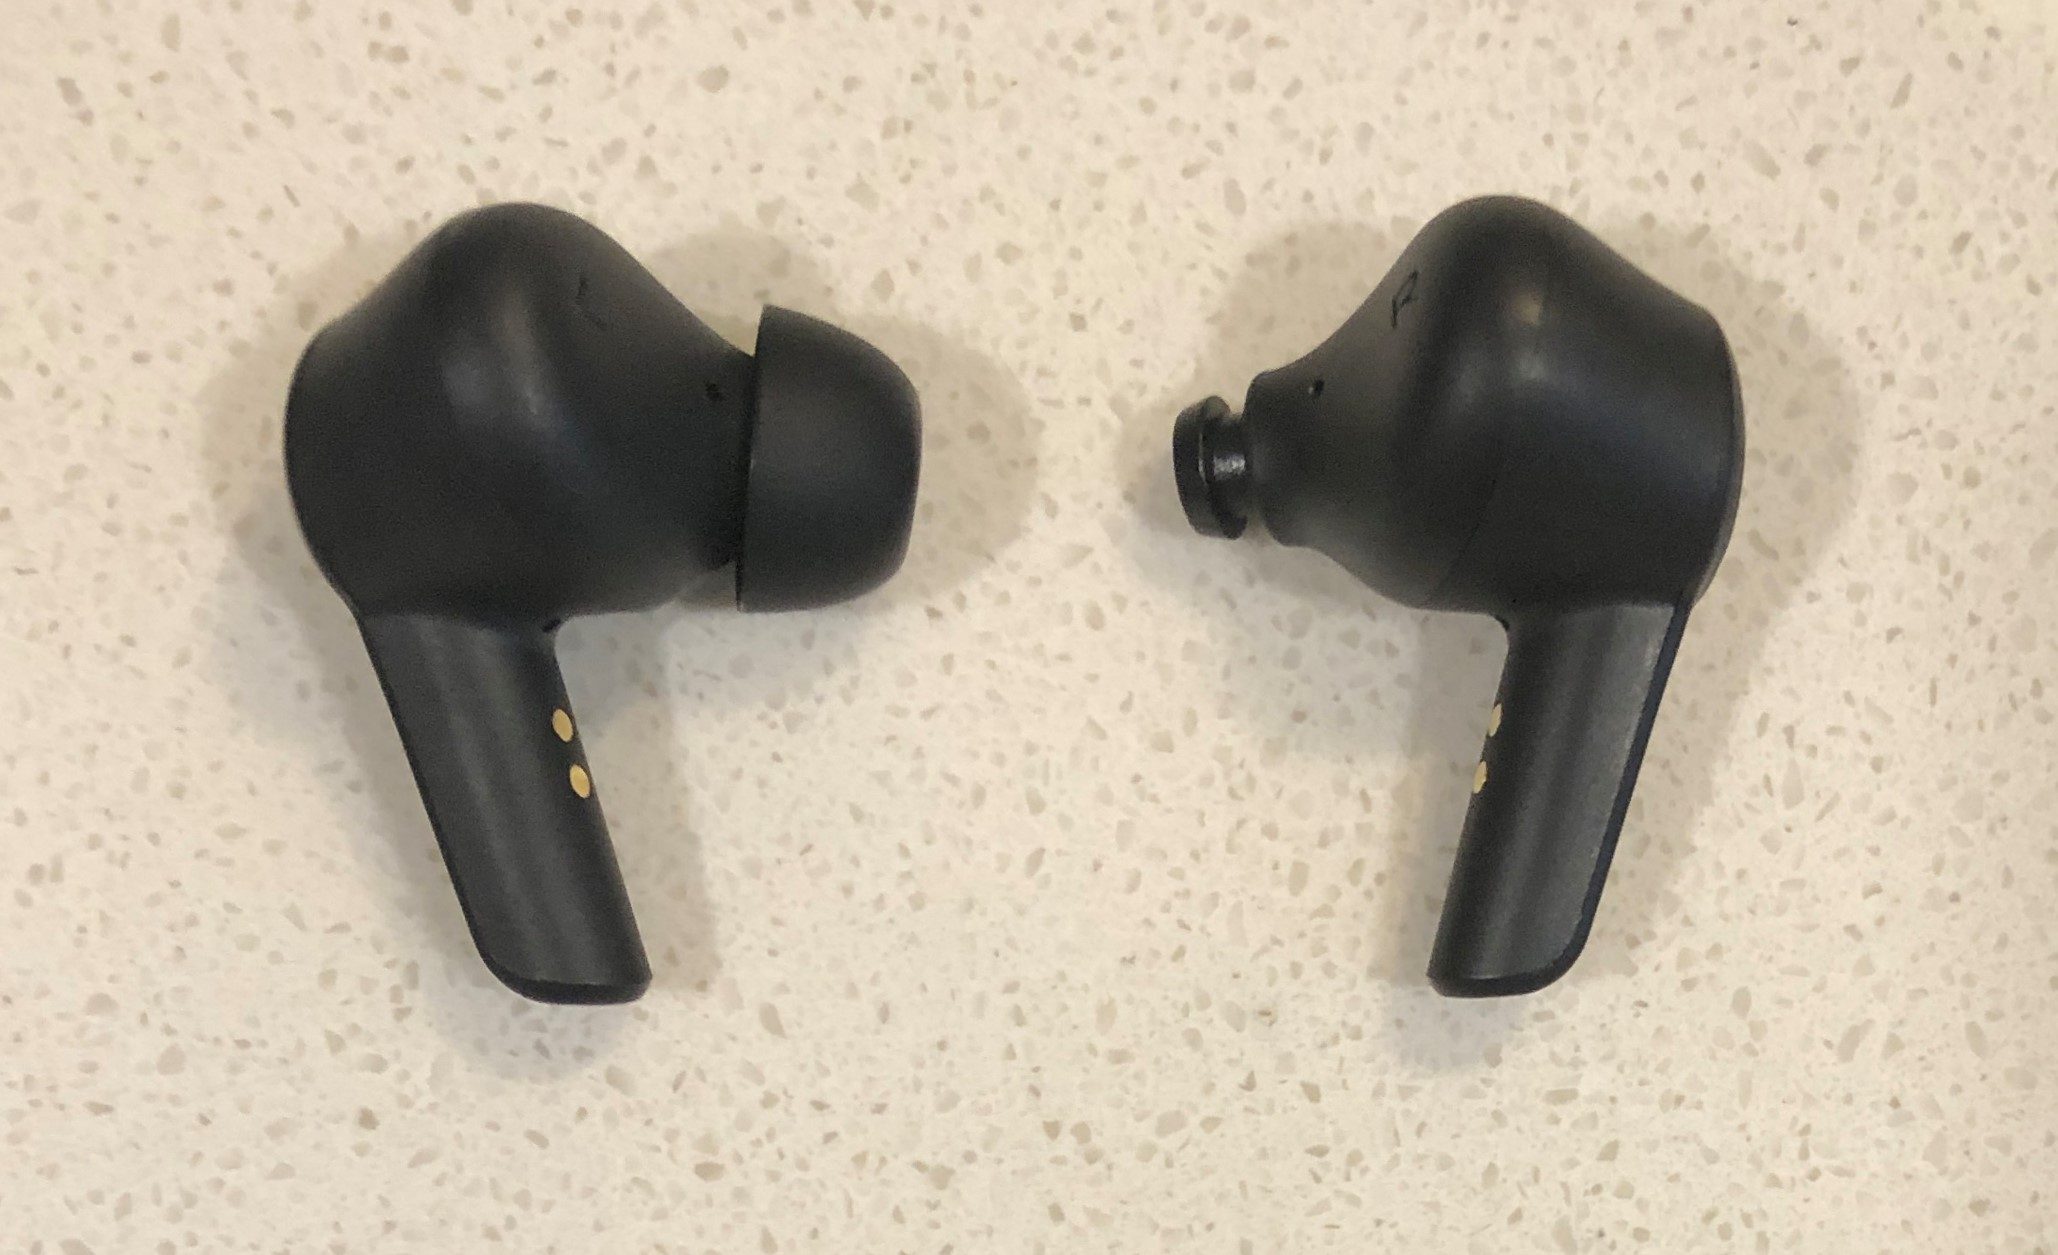 SoundPEATS T3 wireless earbud tip and nozzle